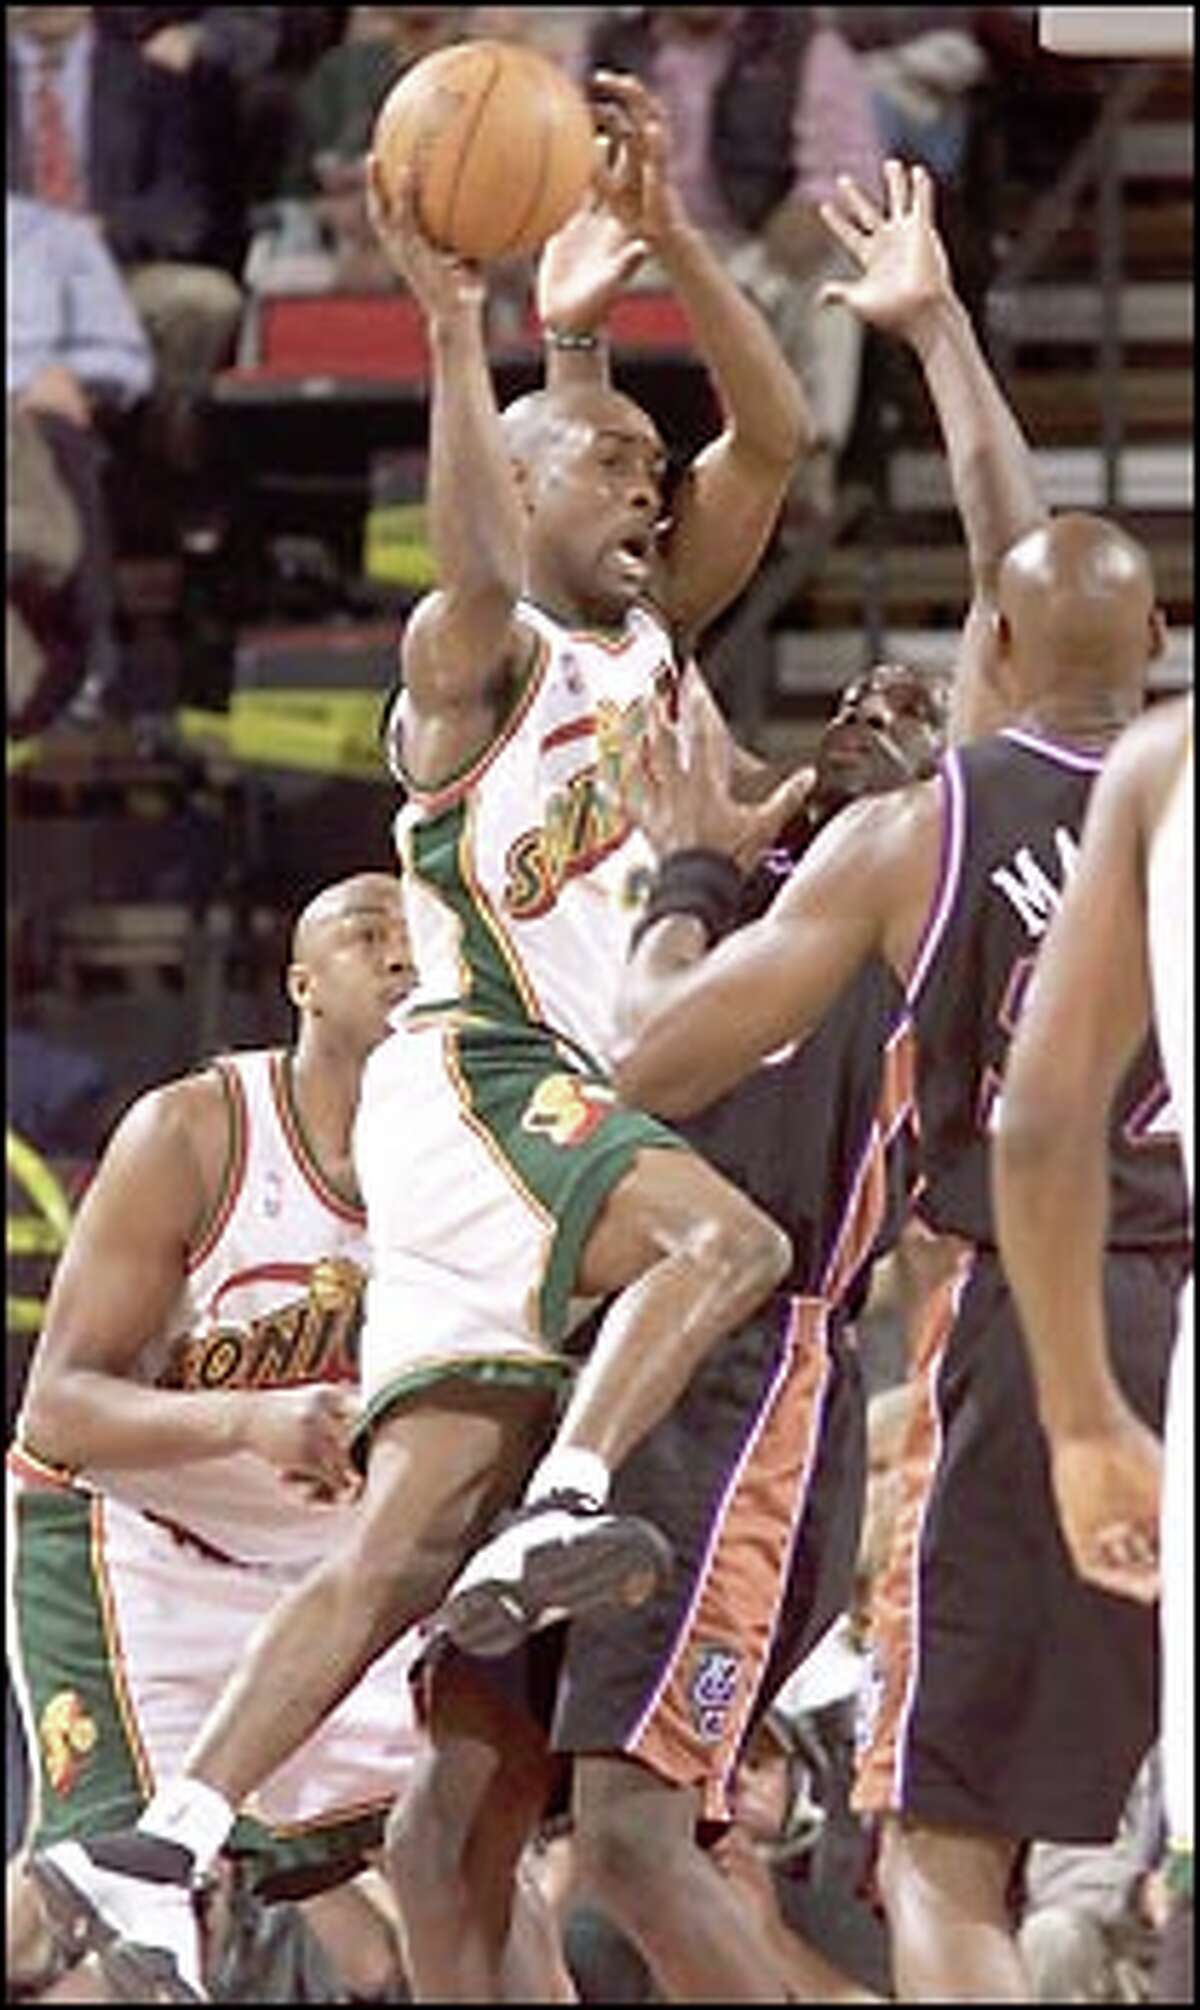 Sonics point guard Gary Payton drives against the Jazz defense in the first quarter of Seattle's win in KeyArena.